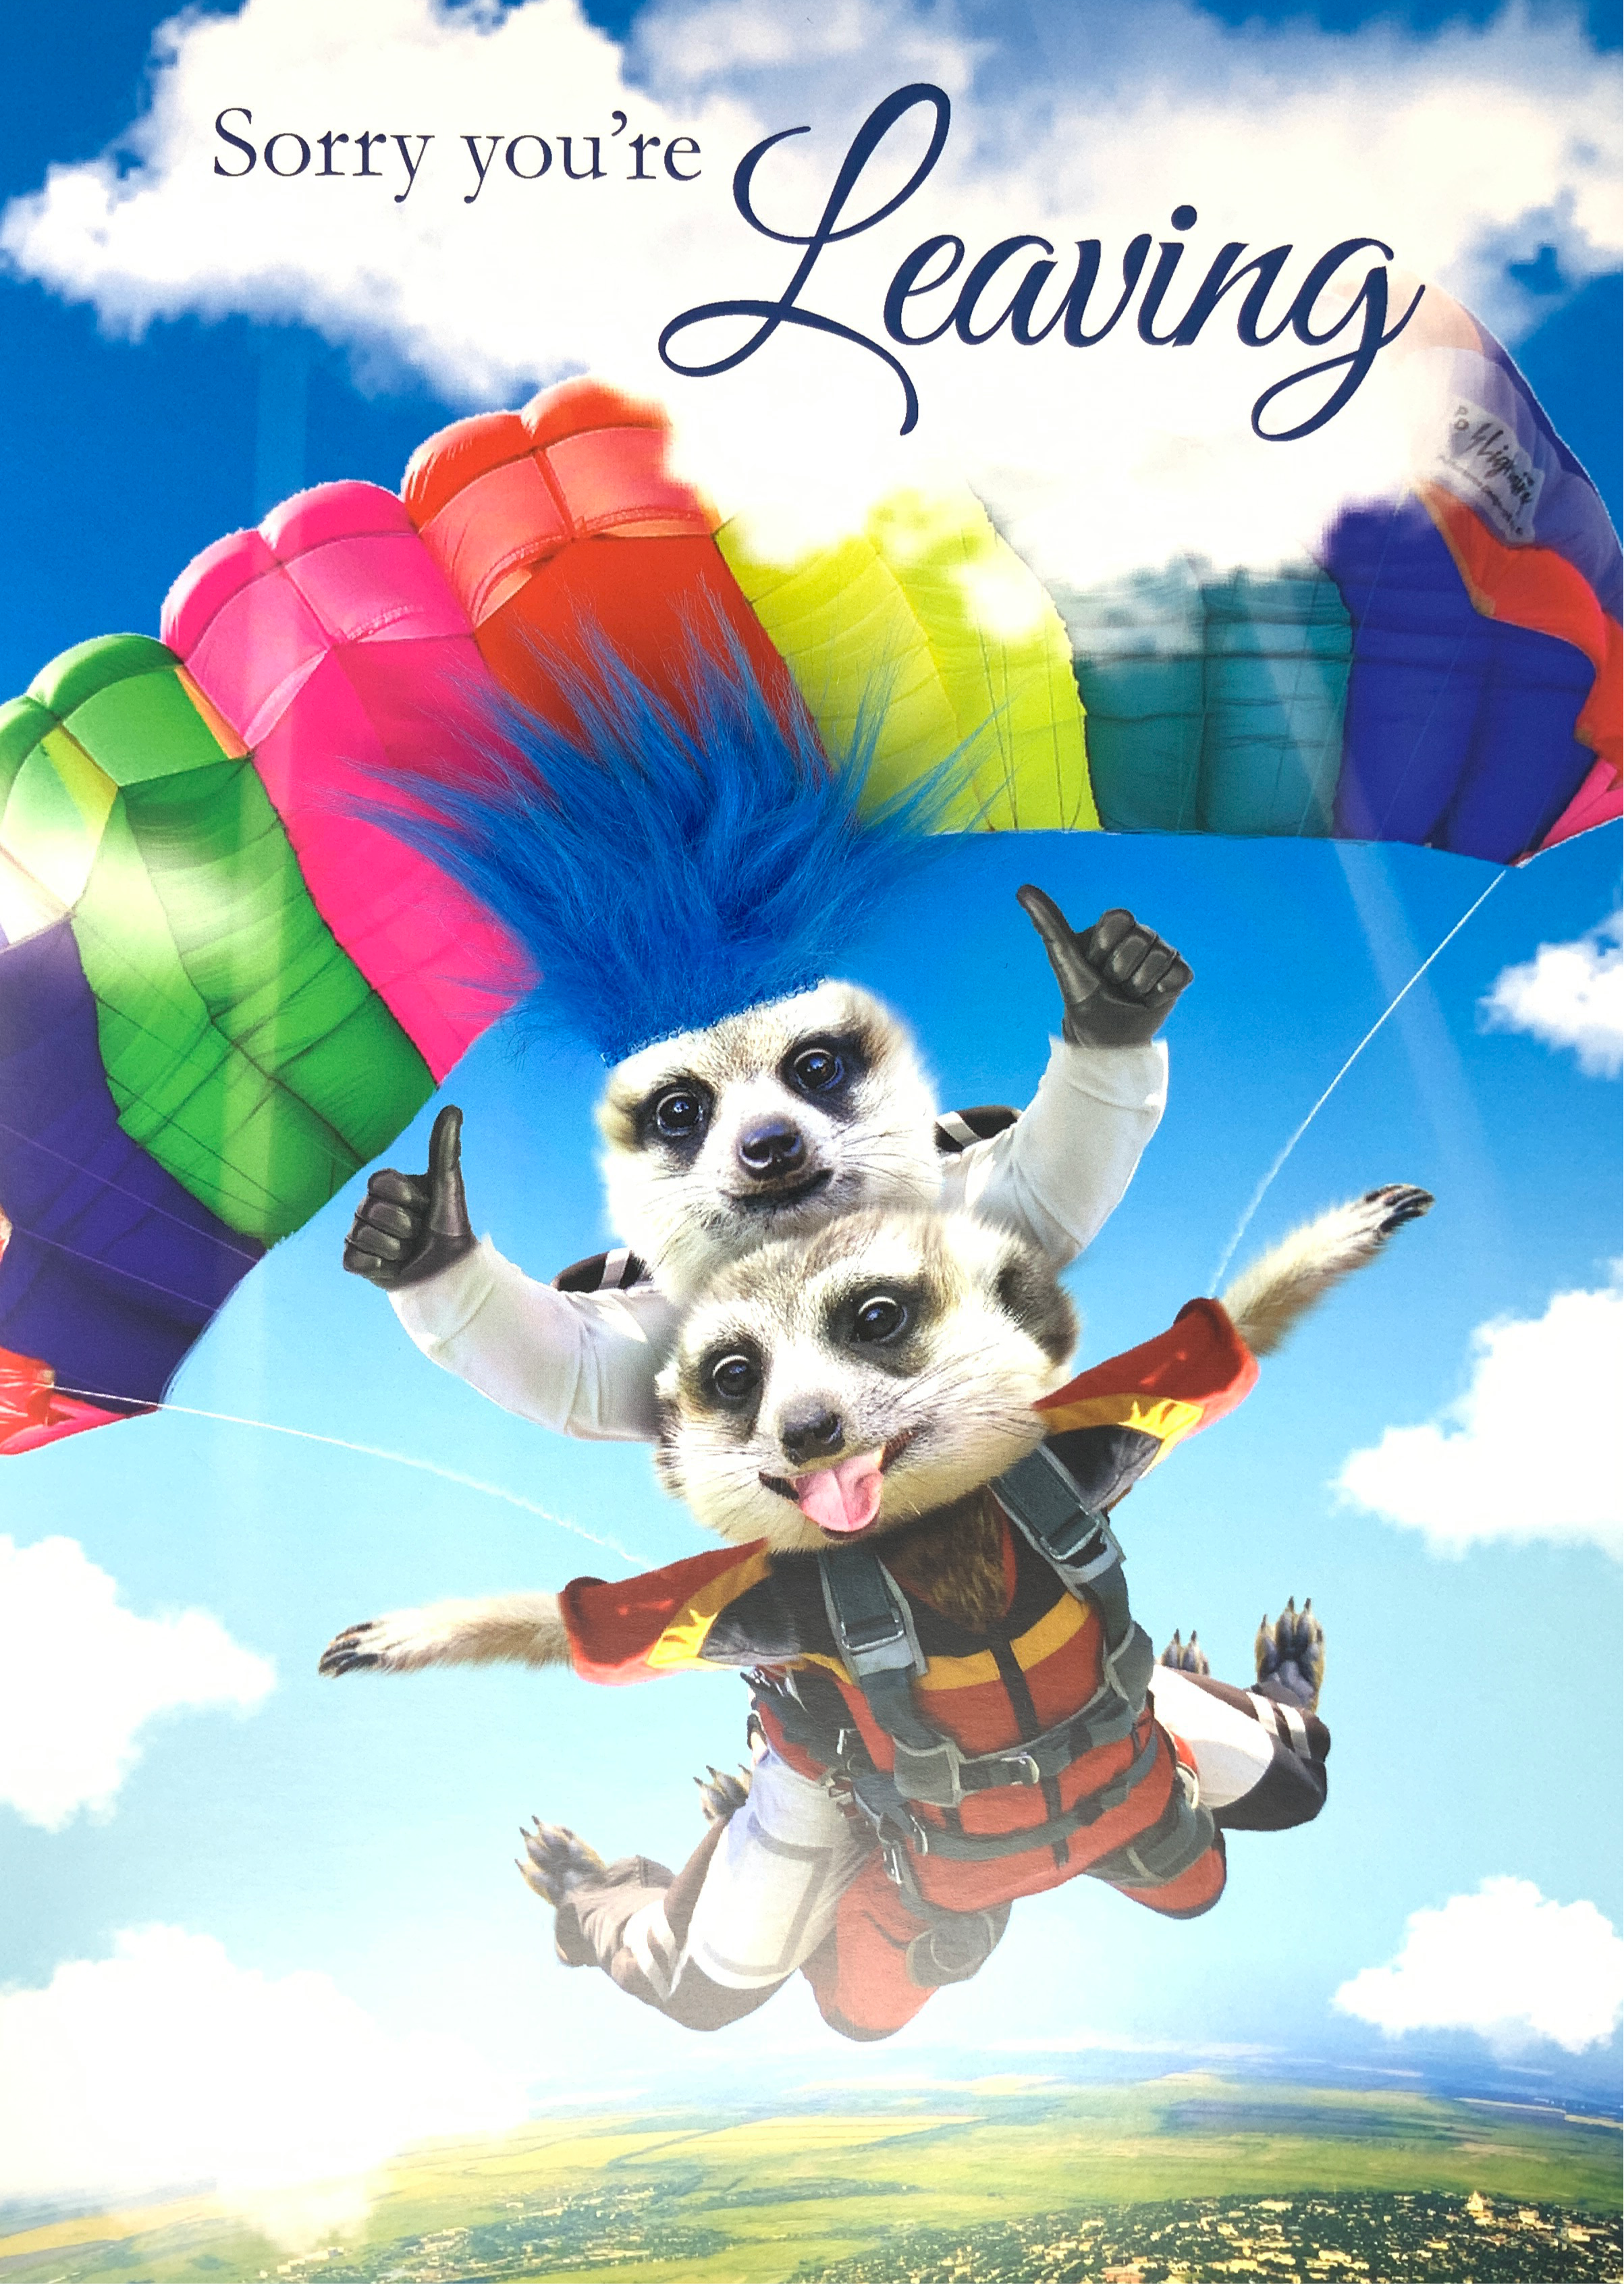 Sorry You’re Leaving Card - Meerkats & A Parachute ( Large - A4 Size )